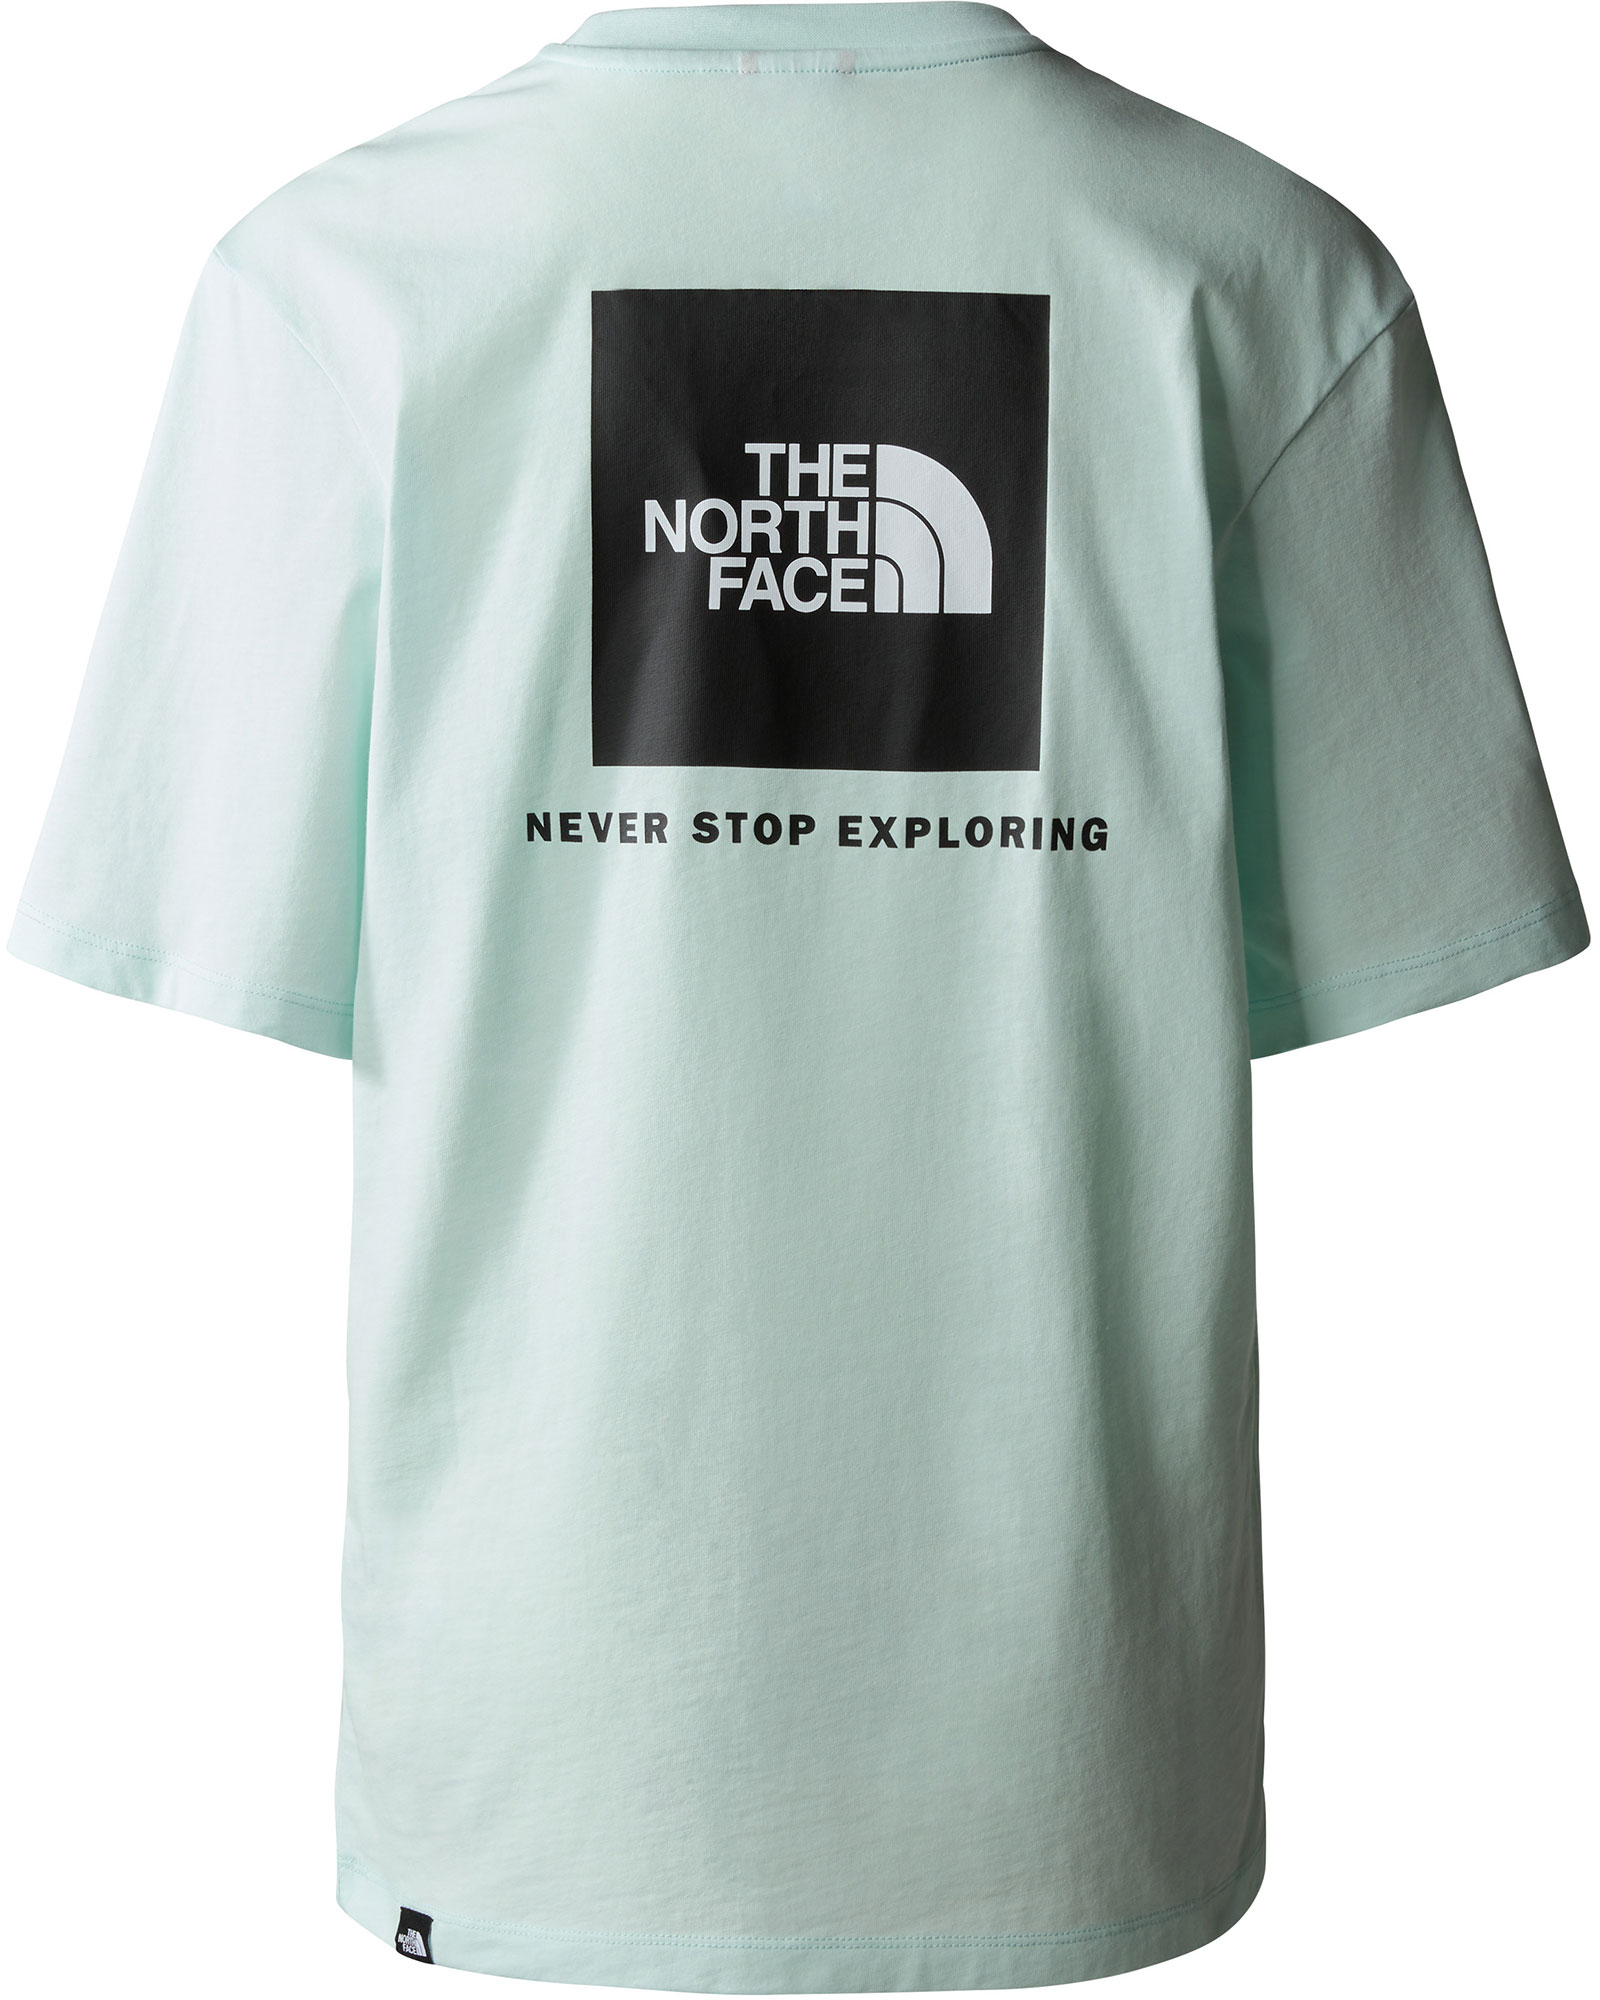 The North Face Relaxed Redbox Women’s T Shirt - Skylight Blue XS